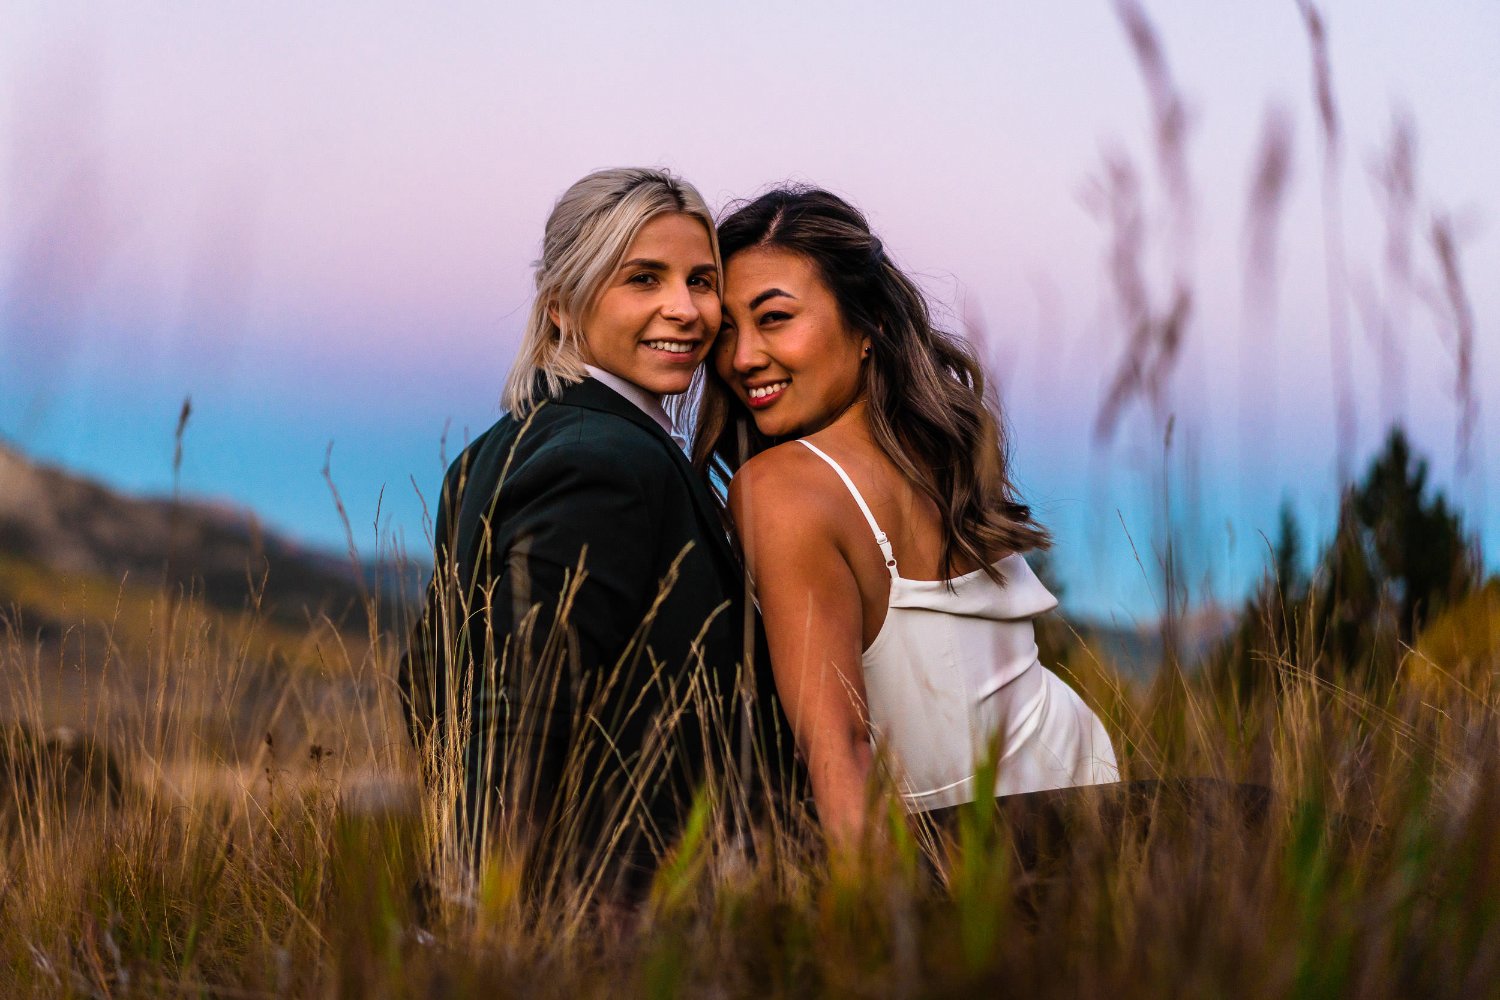 Two women capturing intimate elopement photos in tall grass at sunset.